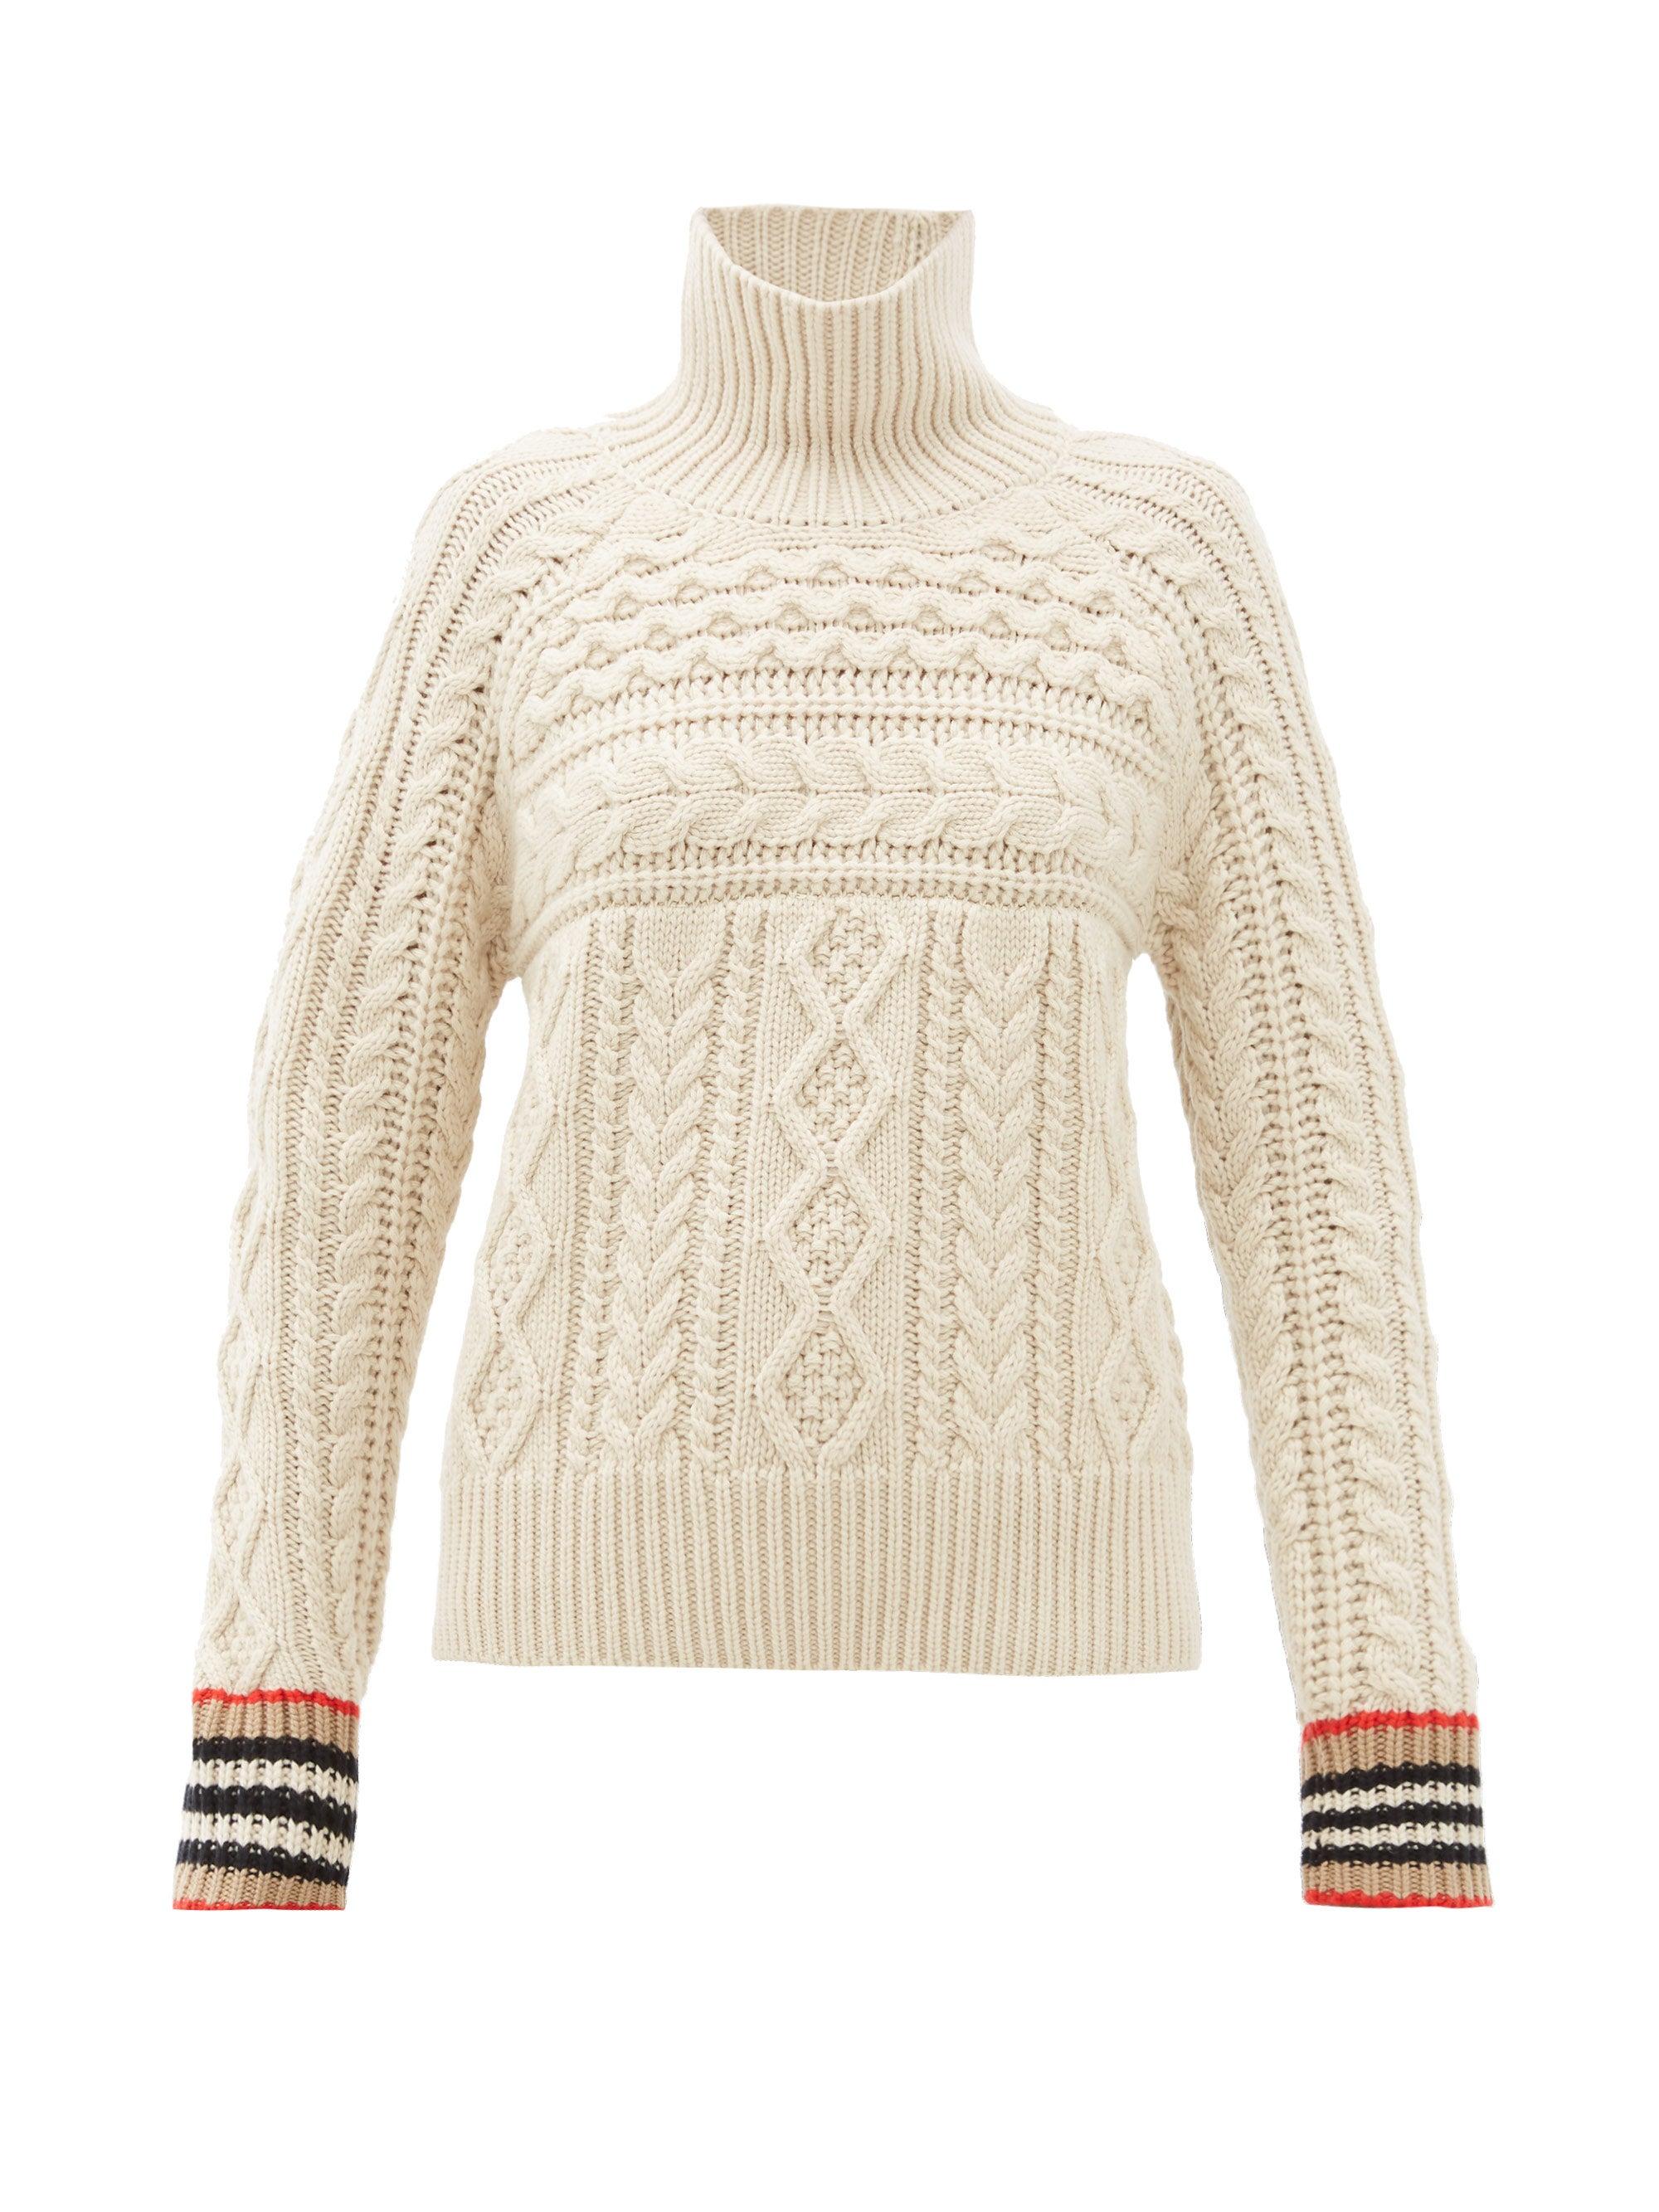 Burberry Cable-knitted Cashmere Sweater in Ivory (White) -